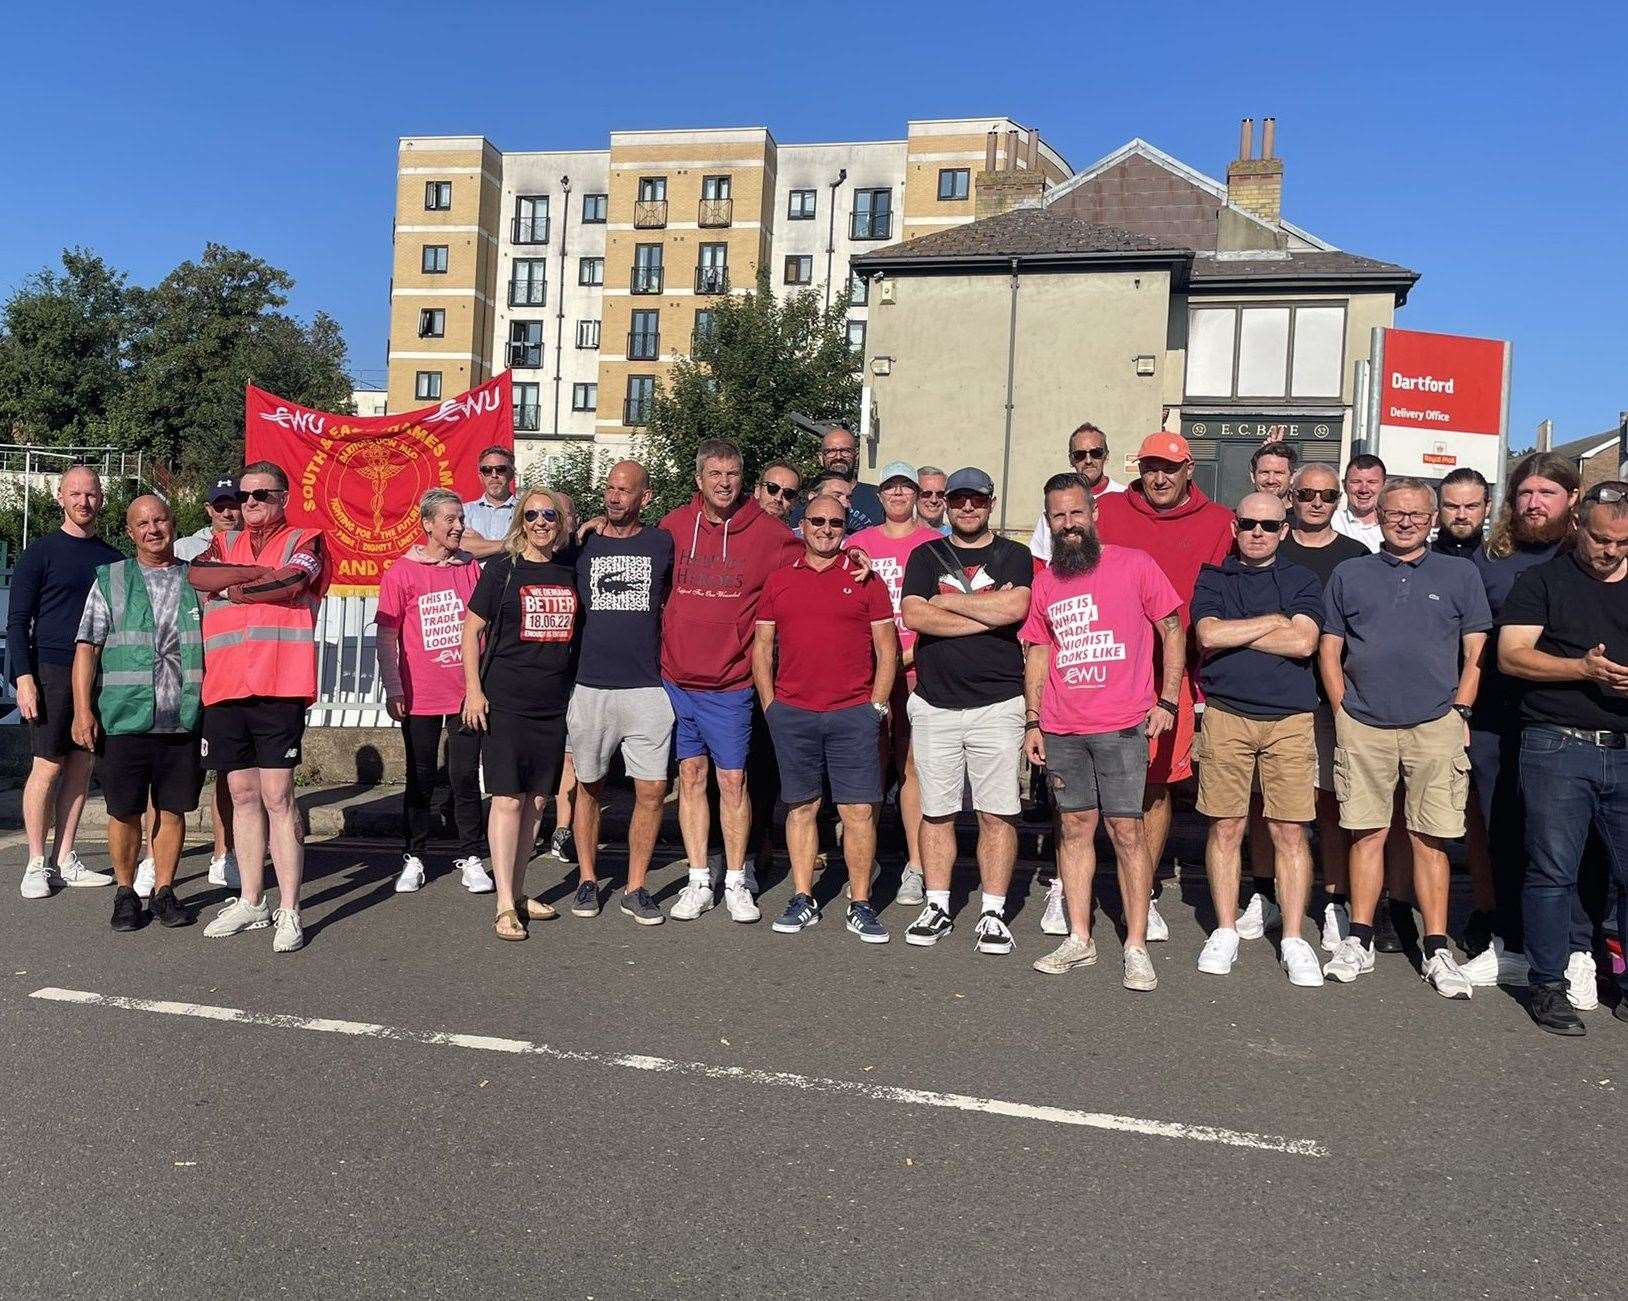 Royal Mail members on the Dartford picket outside the West Hill sorting office. Photo: Antonia Bance